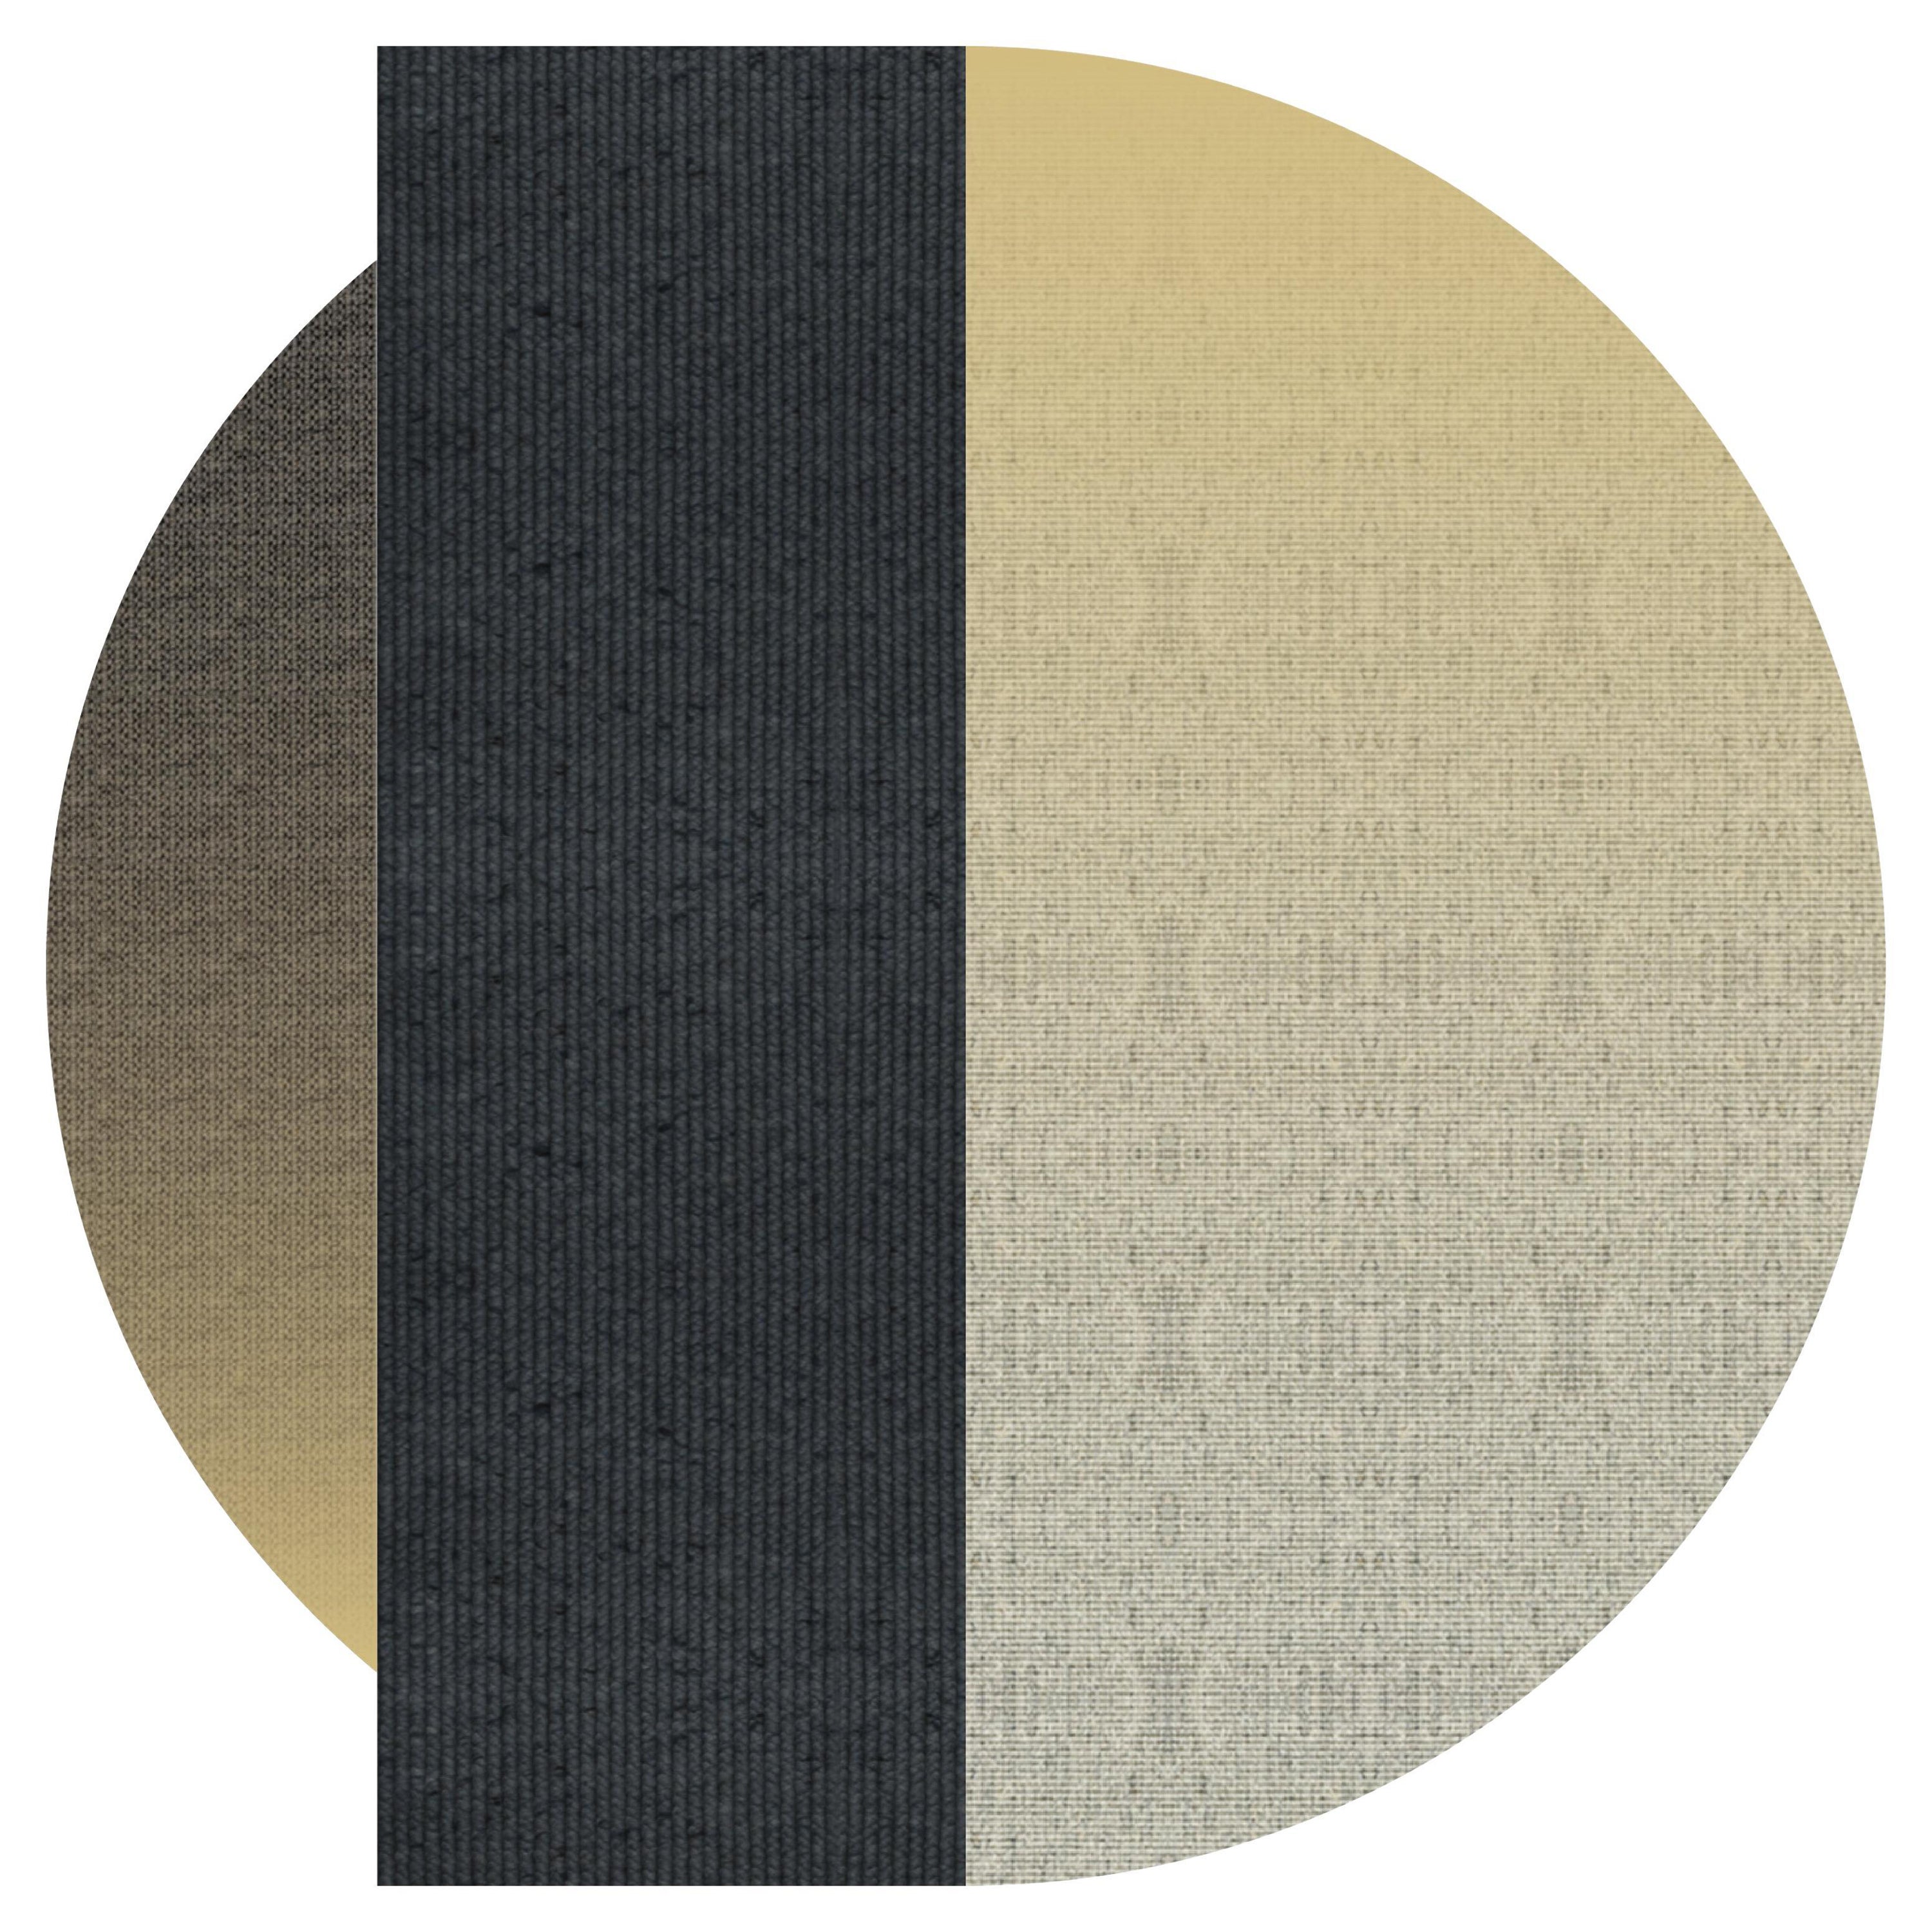 'Flux' Rug in Abaca, Colour 'Pampas', by Claire Vos for Musett Design For Sale